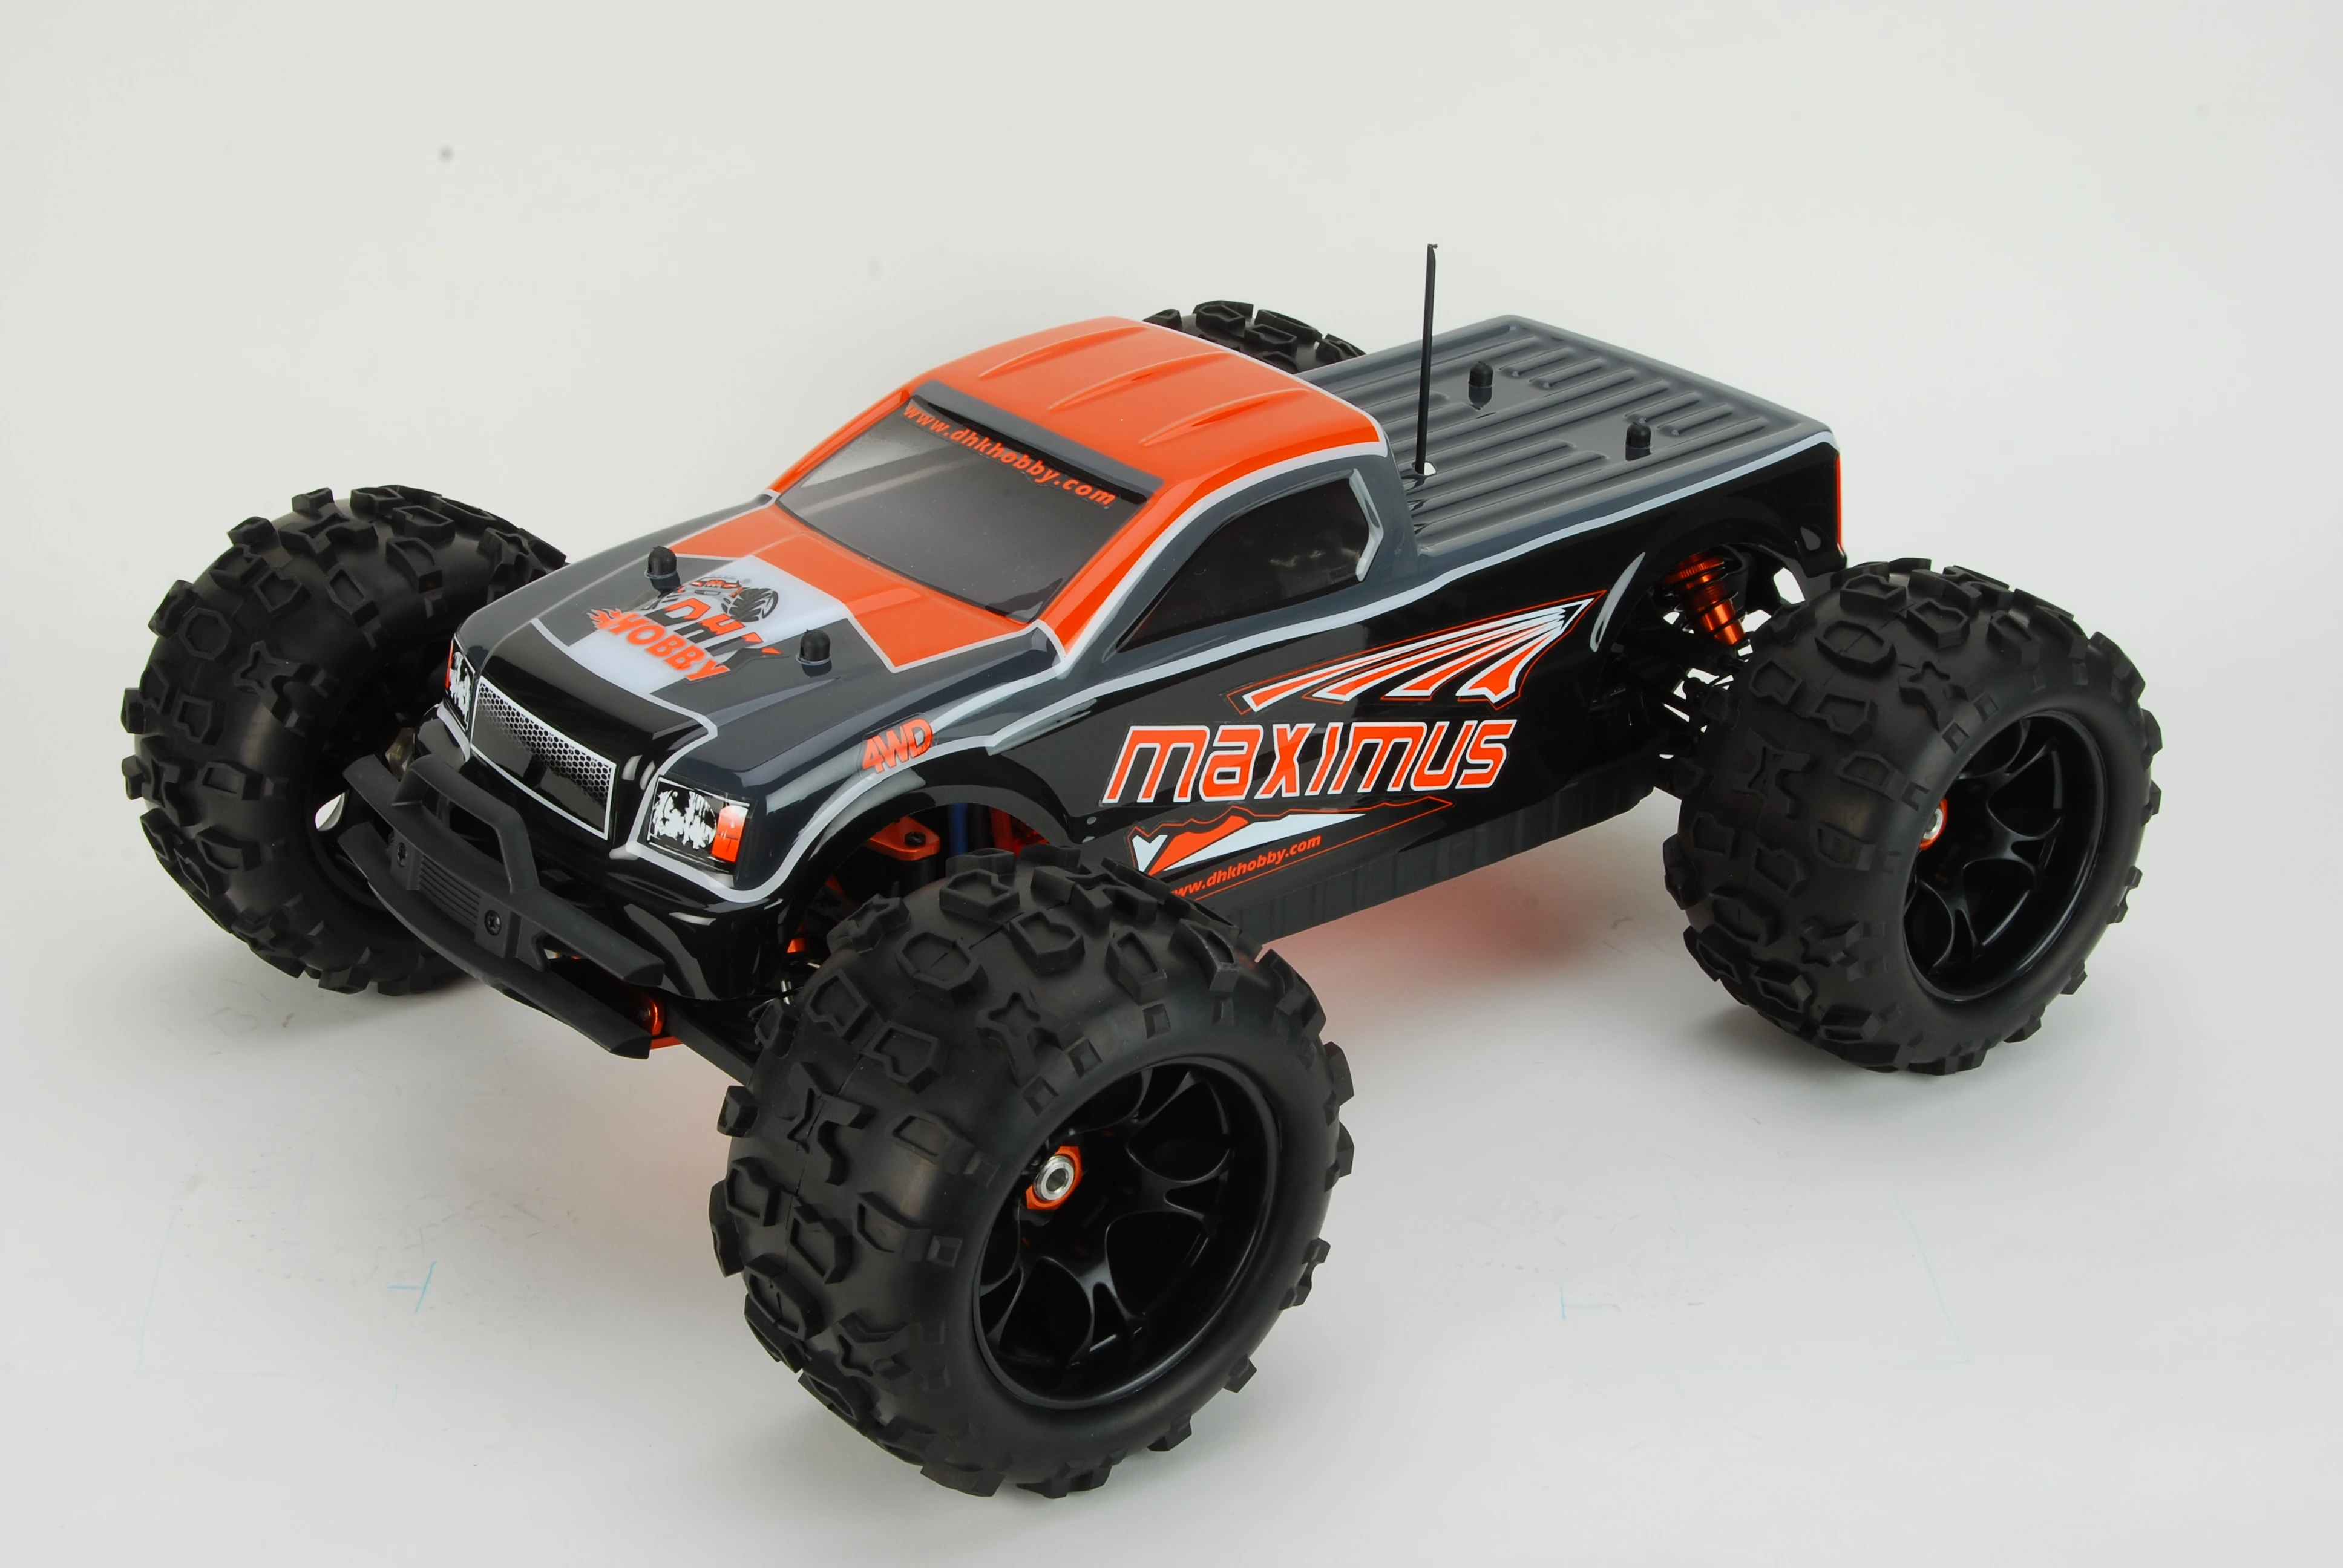 High speed  1/8 4WD Off road remote rc car radio control rc dhk truck